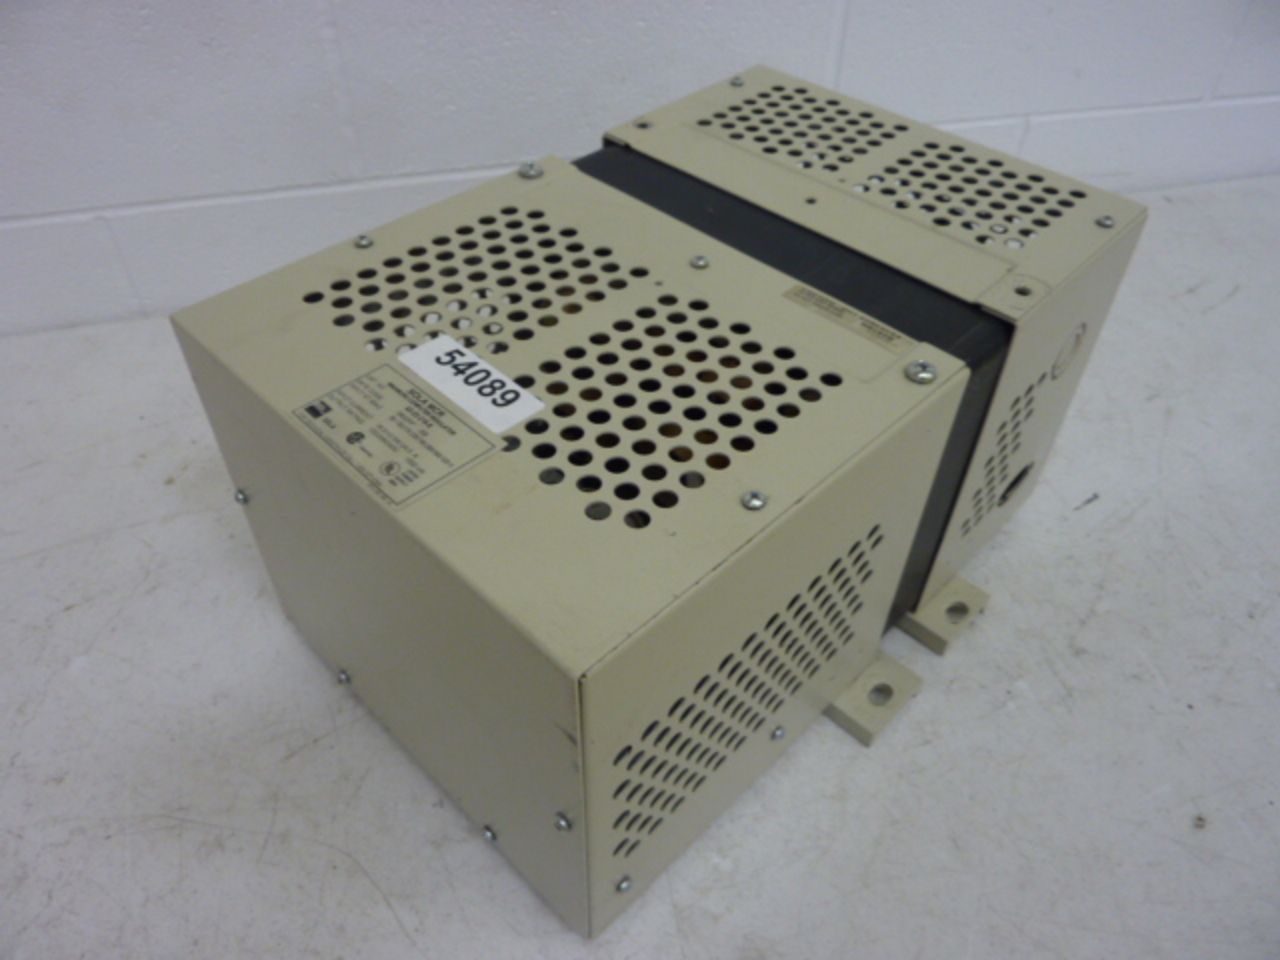 Details about   SOLA ELECTRIC 5.5 kVA Transformer 63-23-215-8 Used #54088 